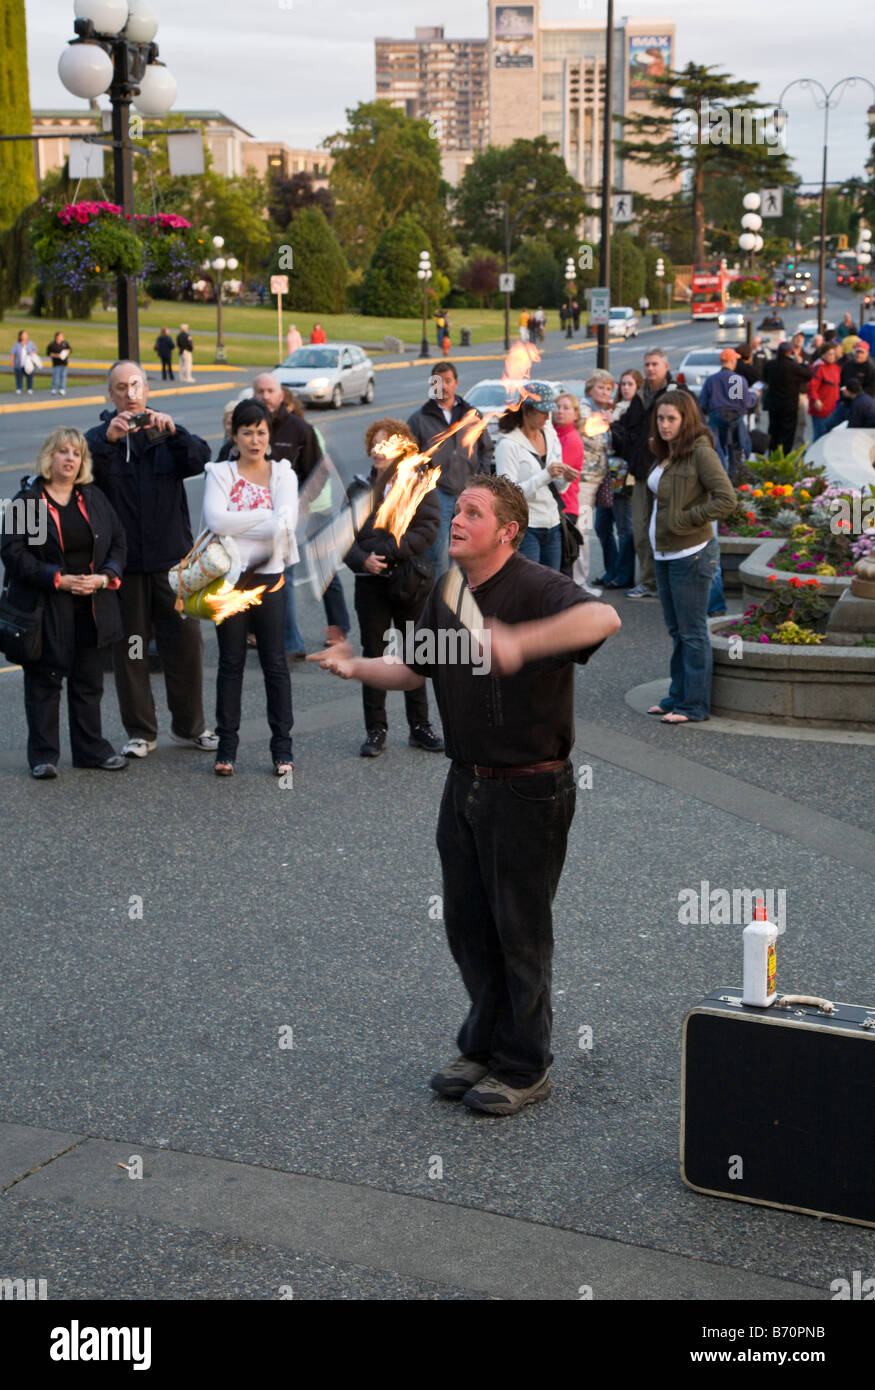 Street performer juggling in front of the Inner Harbour in Victoria, British Columbia, Canada Stock Photo